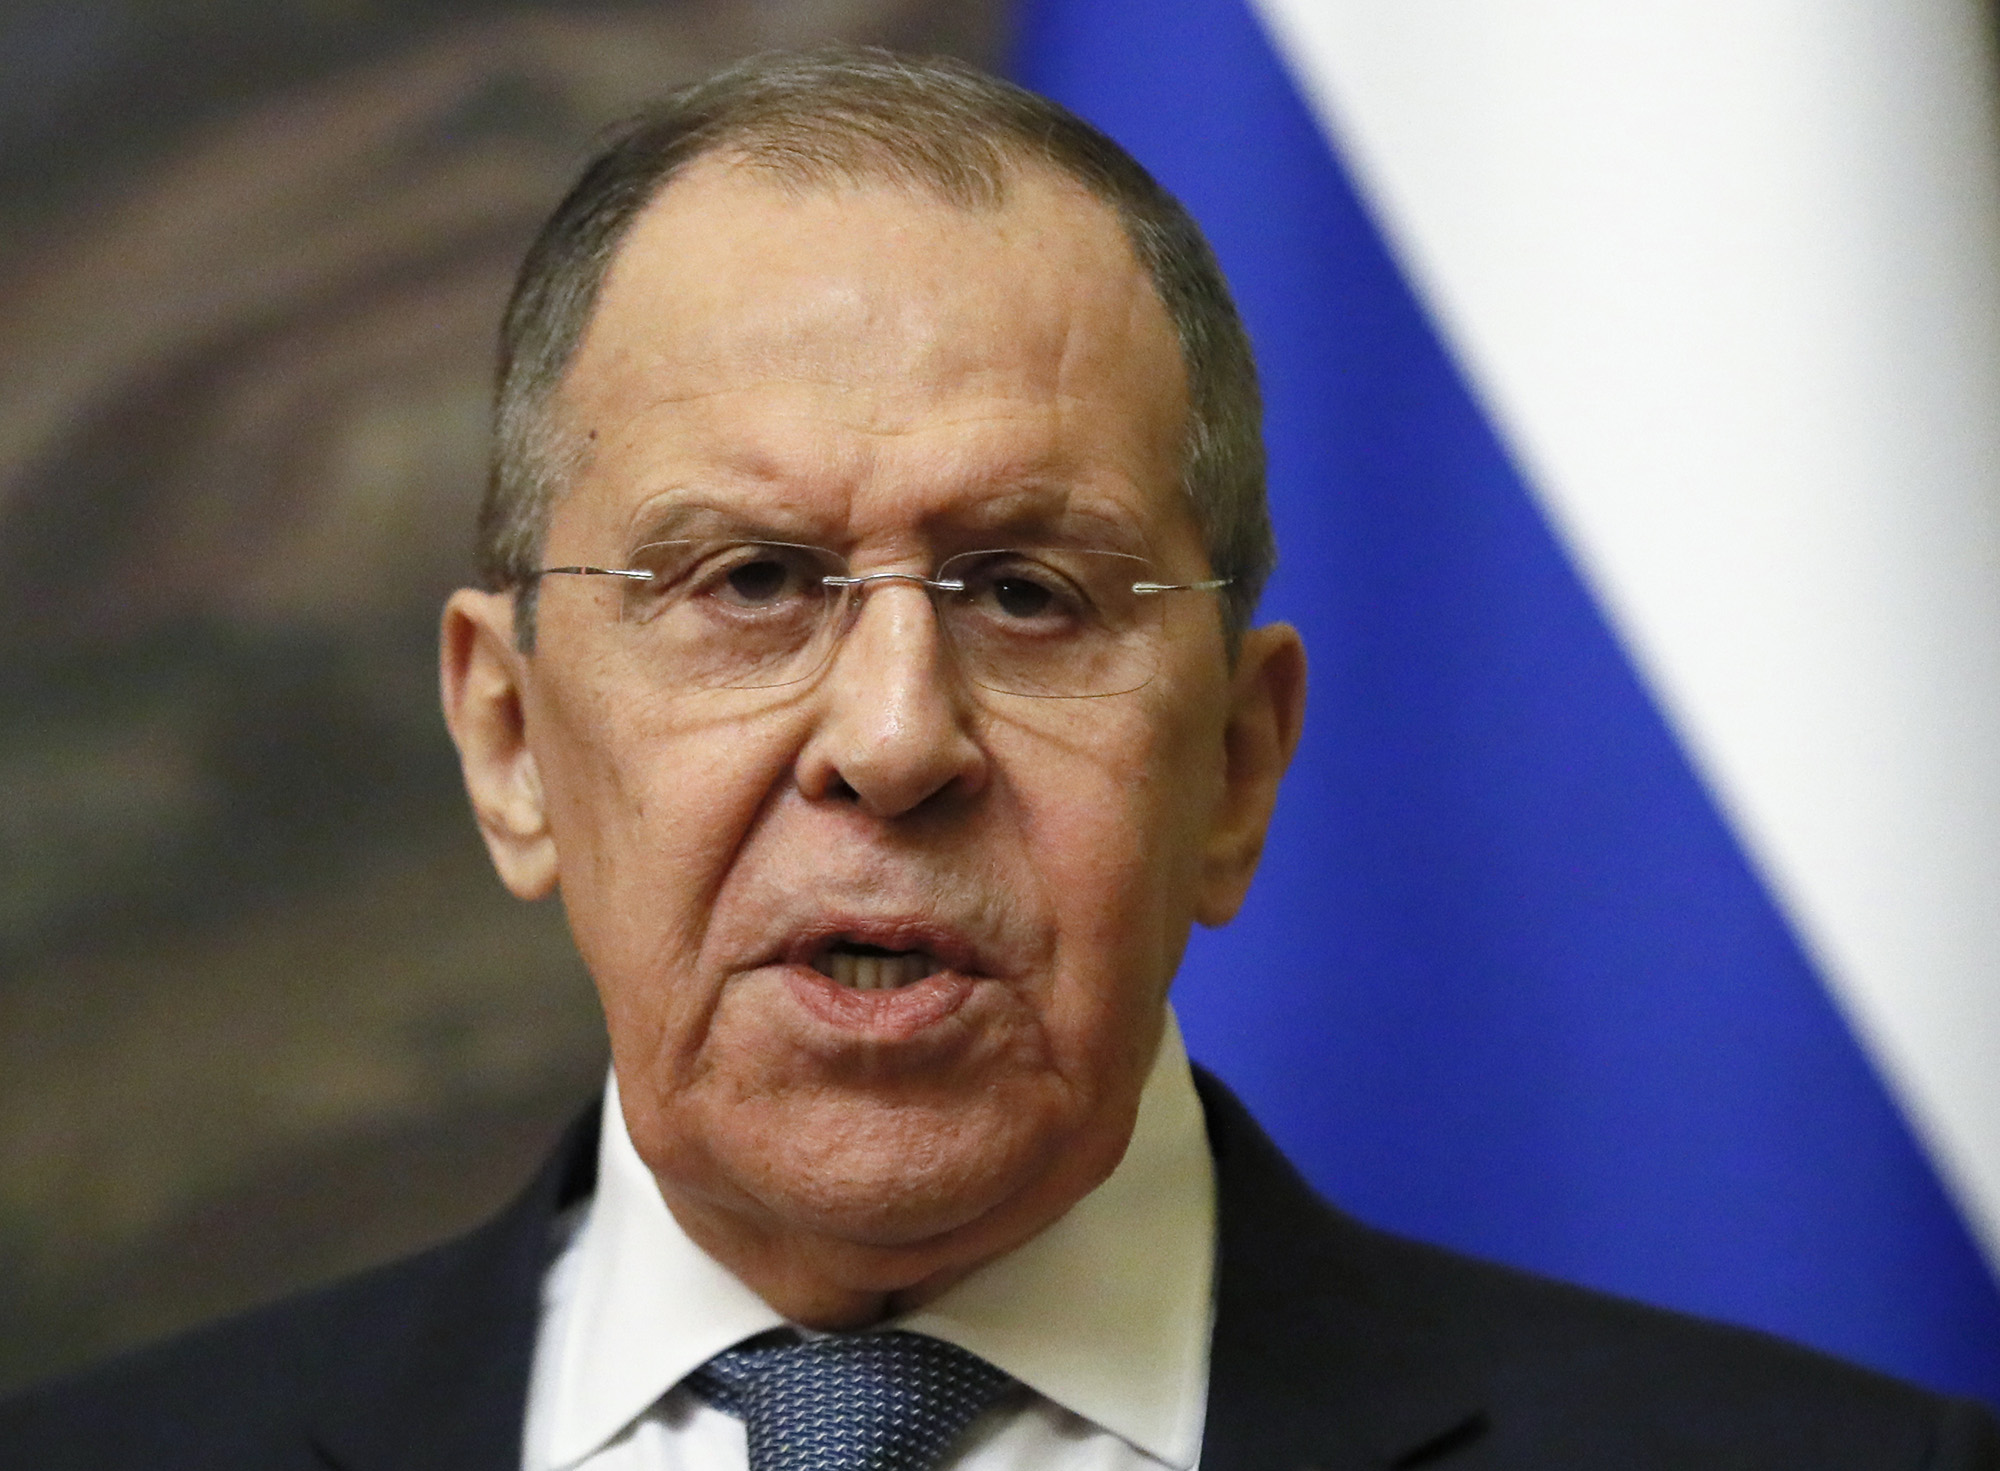 Russian Foreign Minister Sergey Lavrov attends a news conference in Moscow, Russia, on April 27.